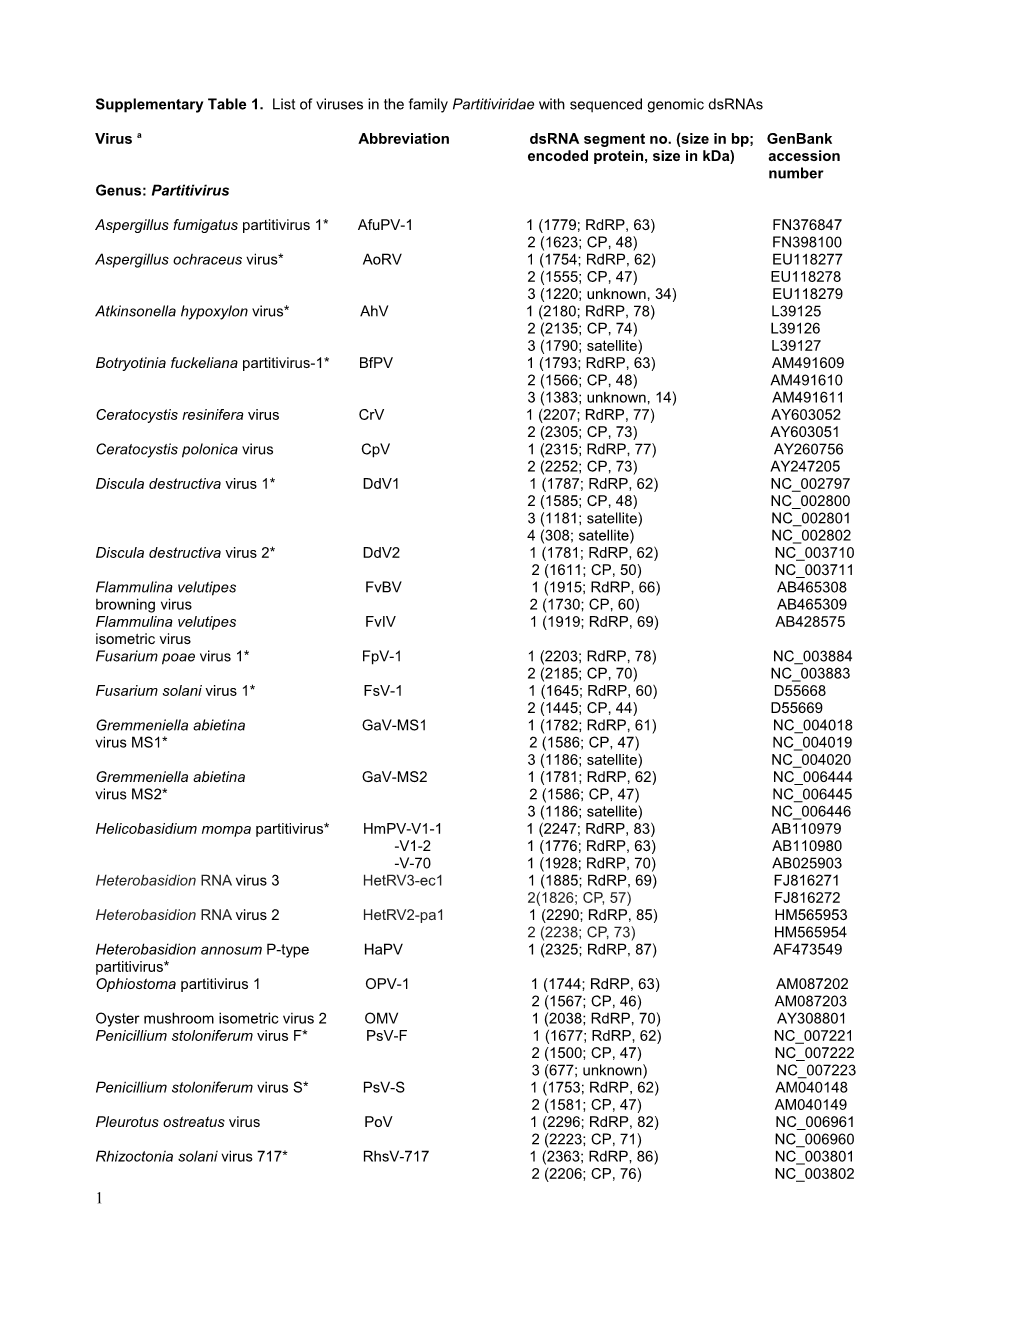 Supplementary Table 1. List of Viruses in the Family Partitiviridae with Sequenced Genomic